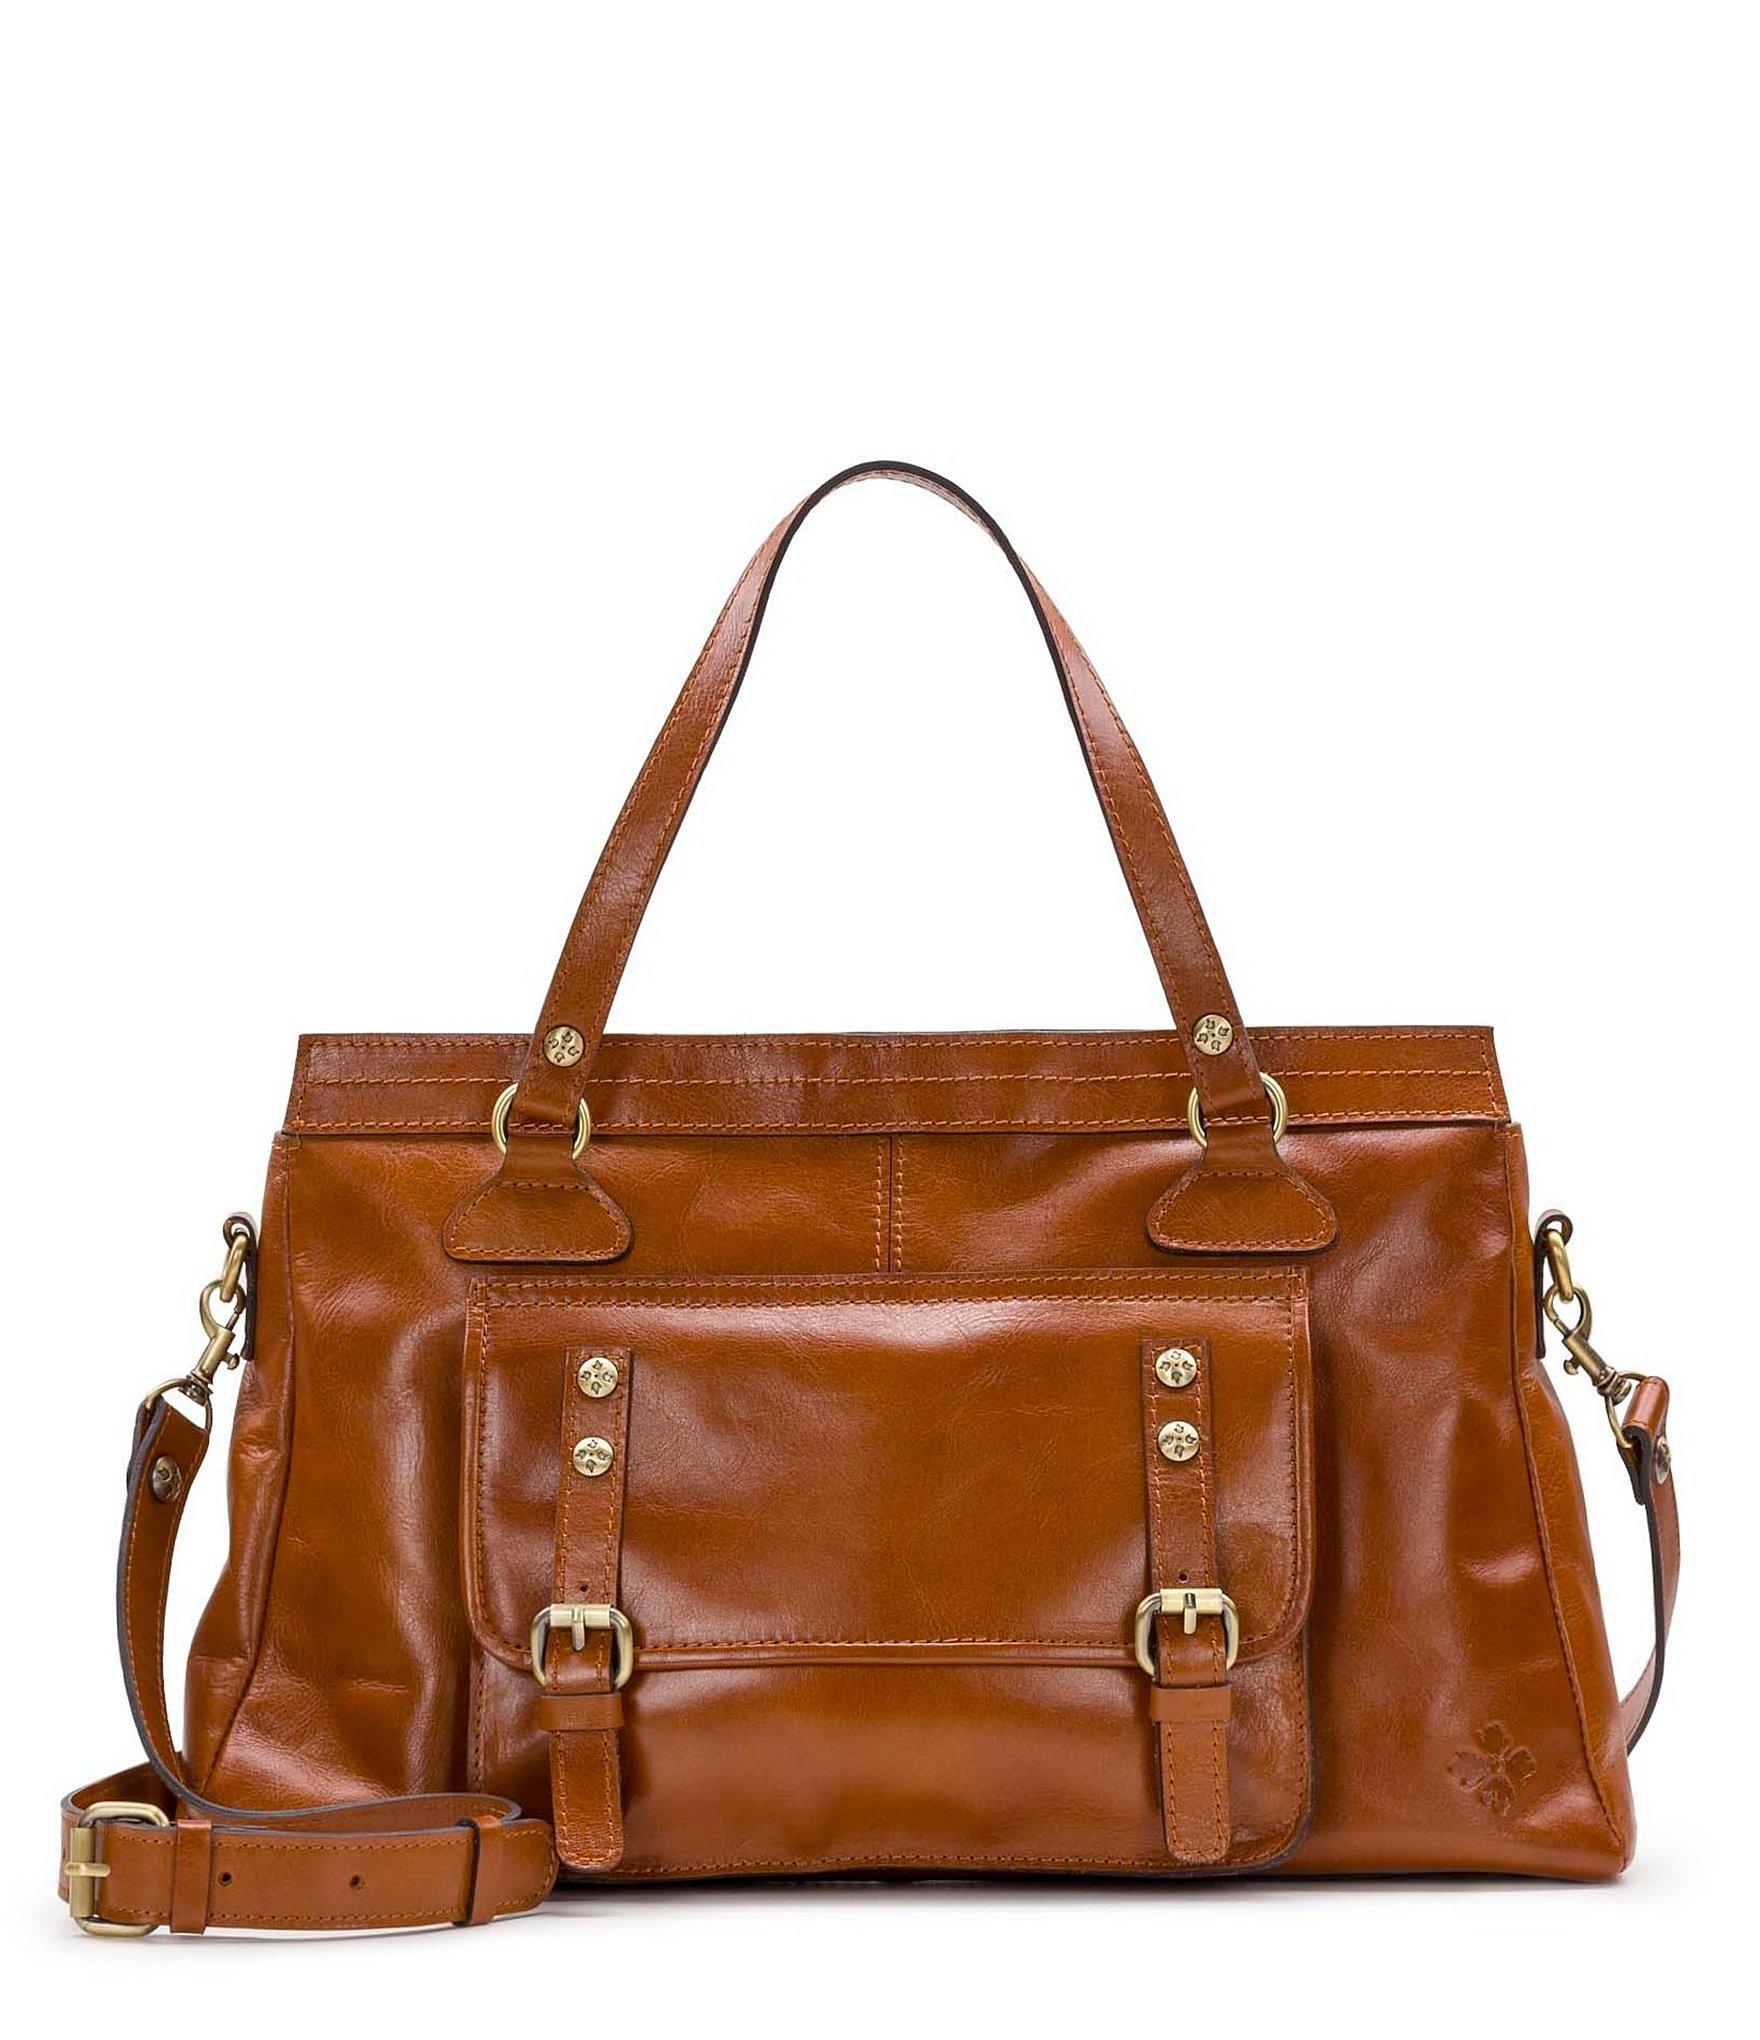 Lyst - Patricia Nash Heritage Collection Cannes Satchel in Brown